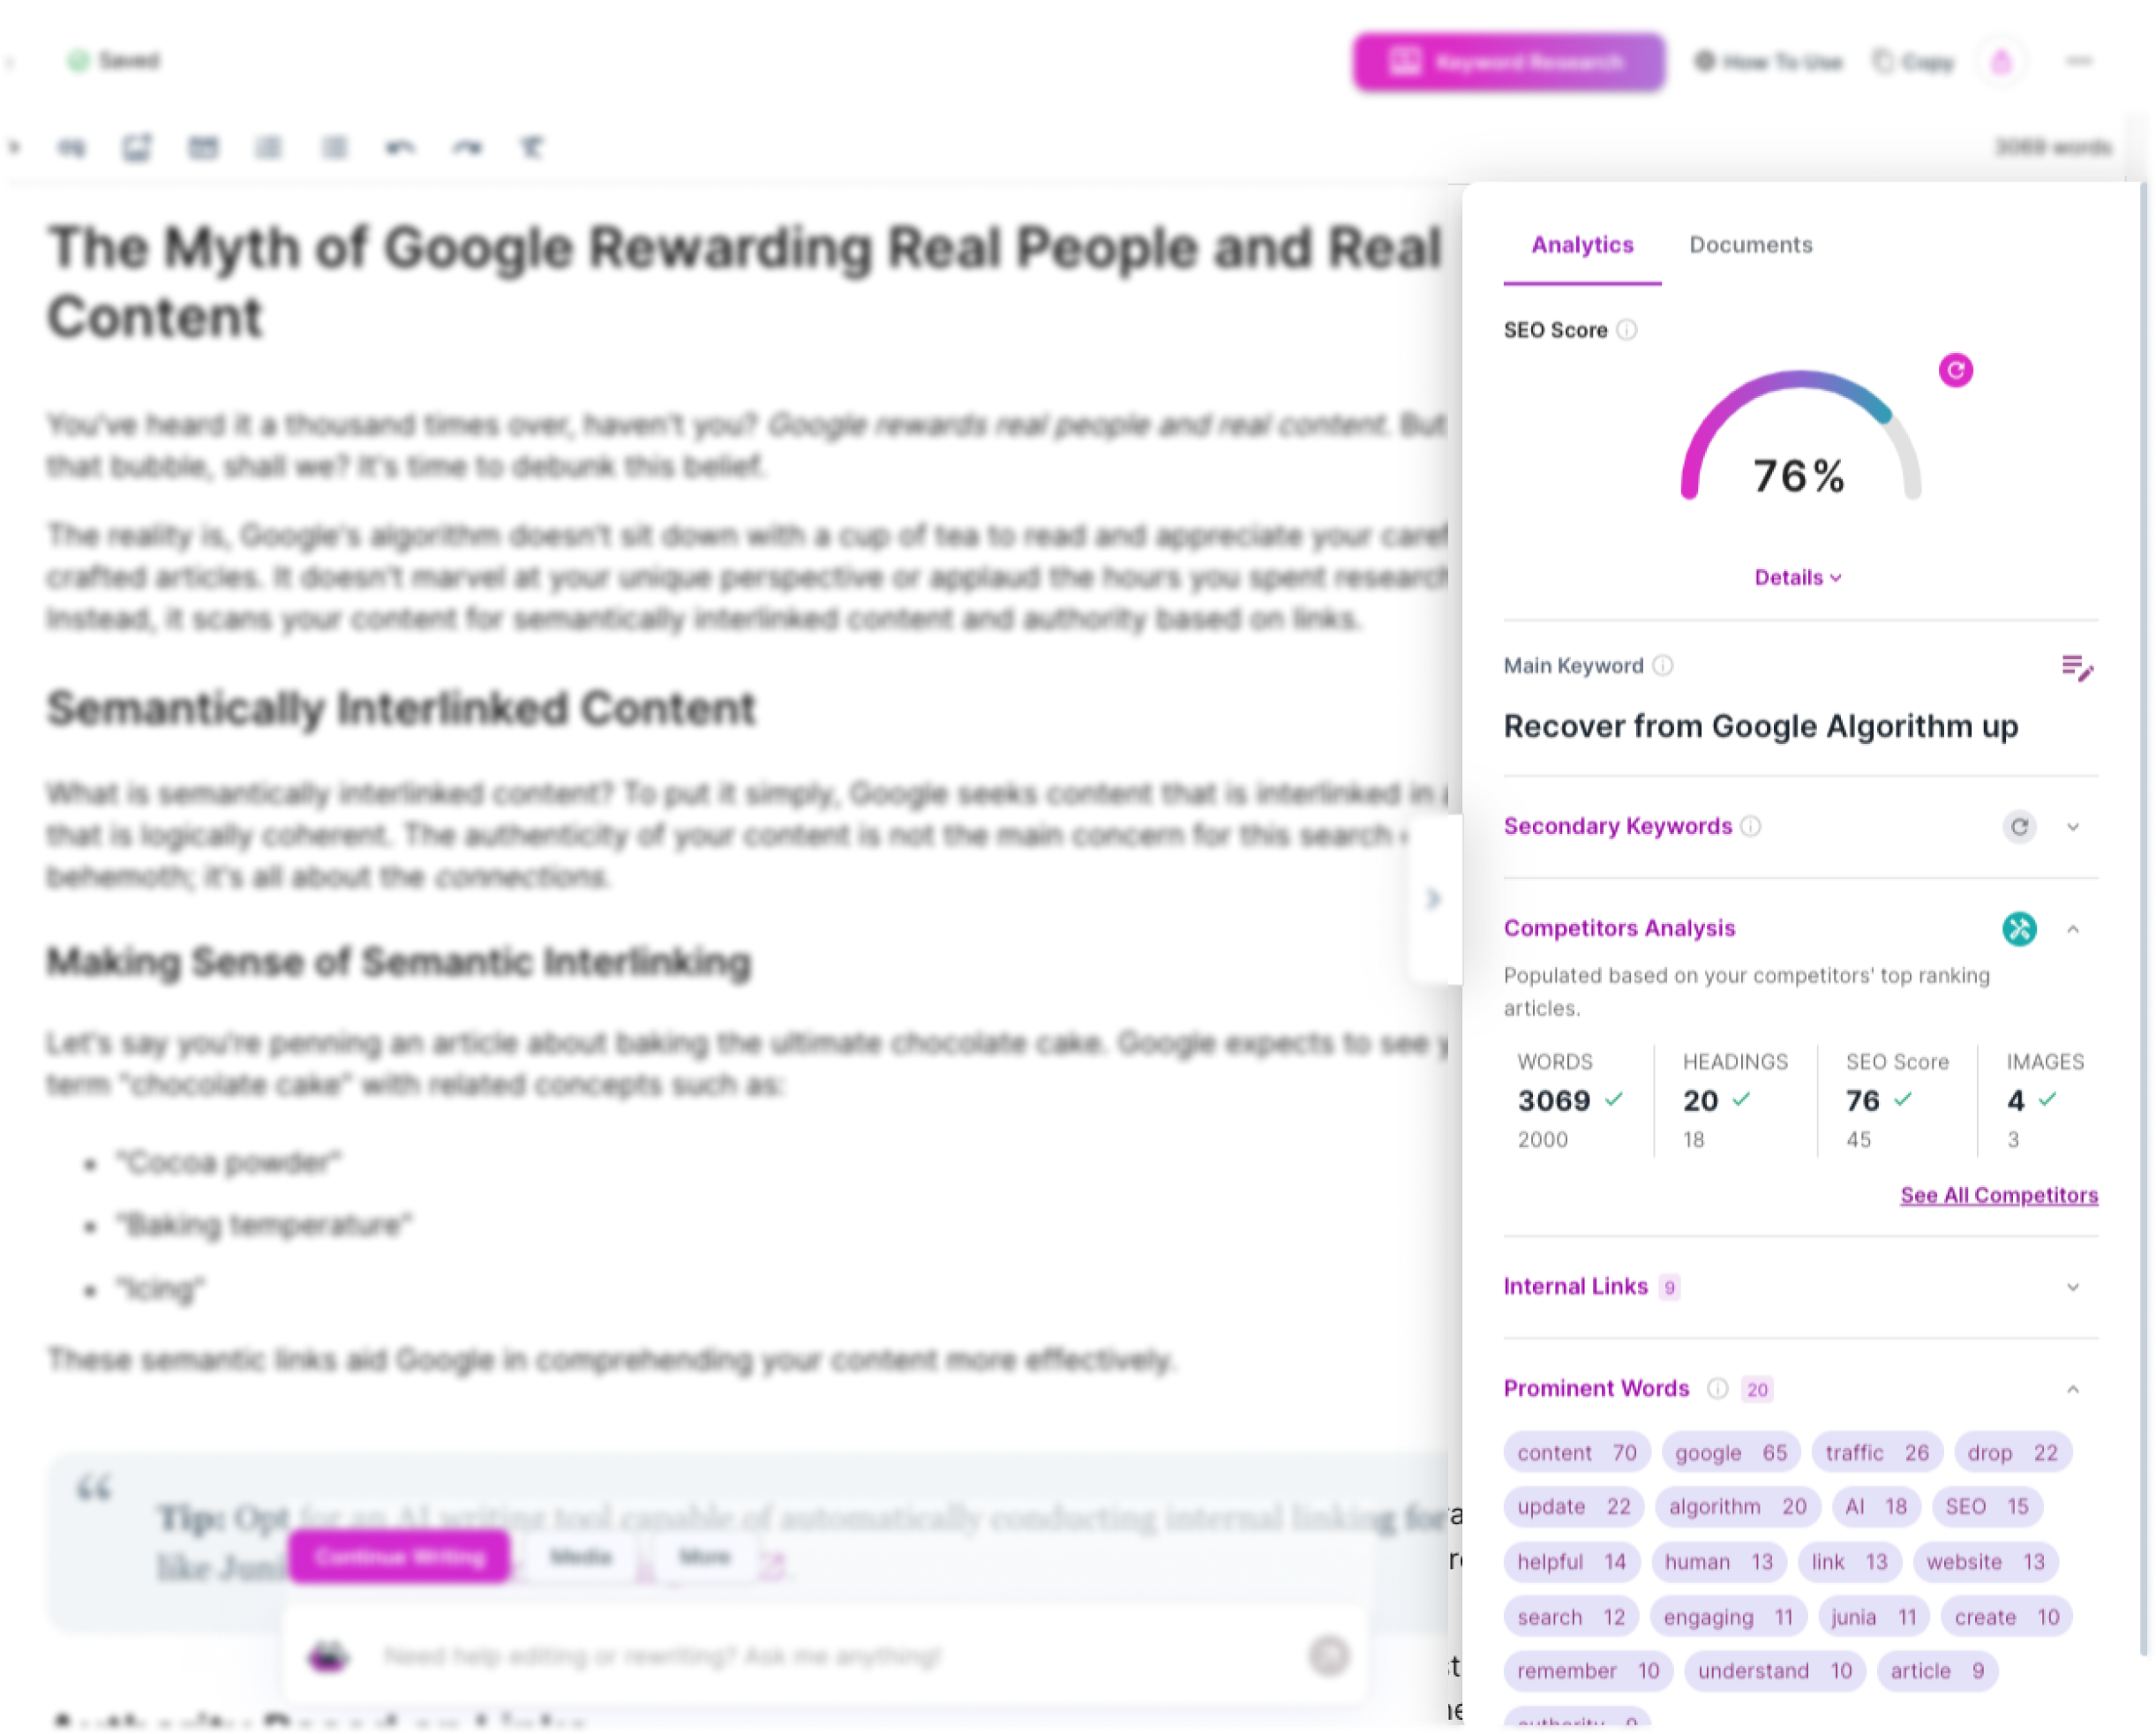 A detailed SEO scoring chart visually representing a blog post's strengths and weaknesses based on key factors such as keyword density, relevance, and readability for ranking on Google.